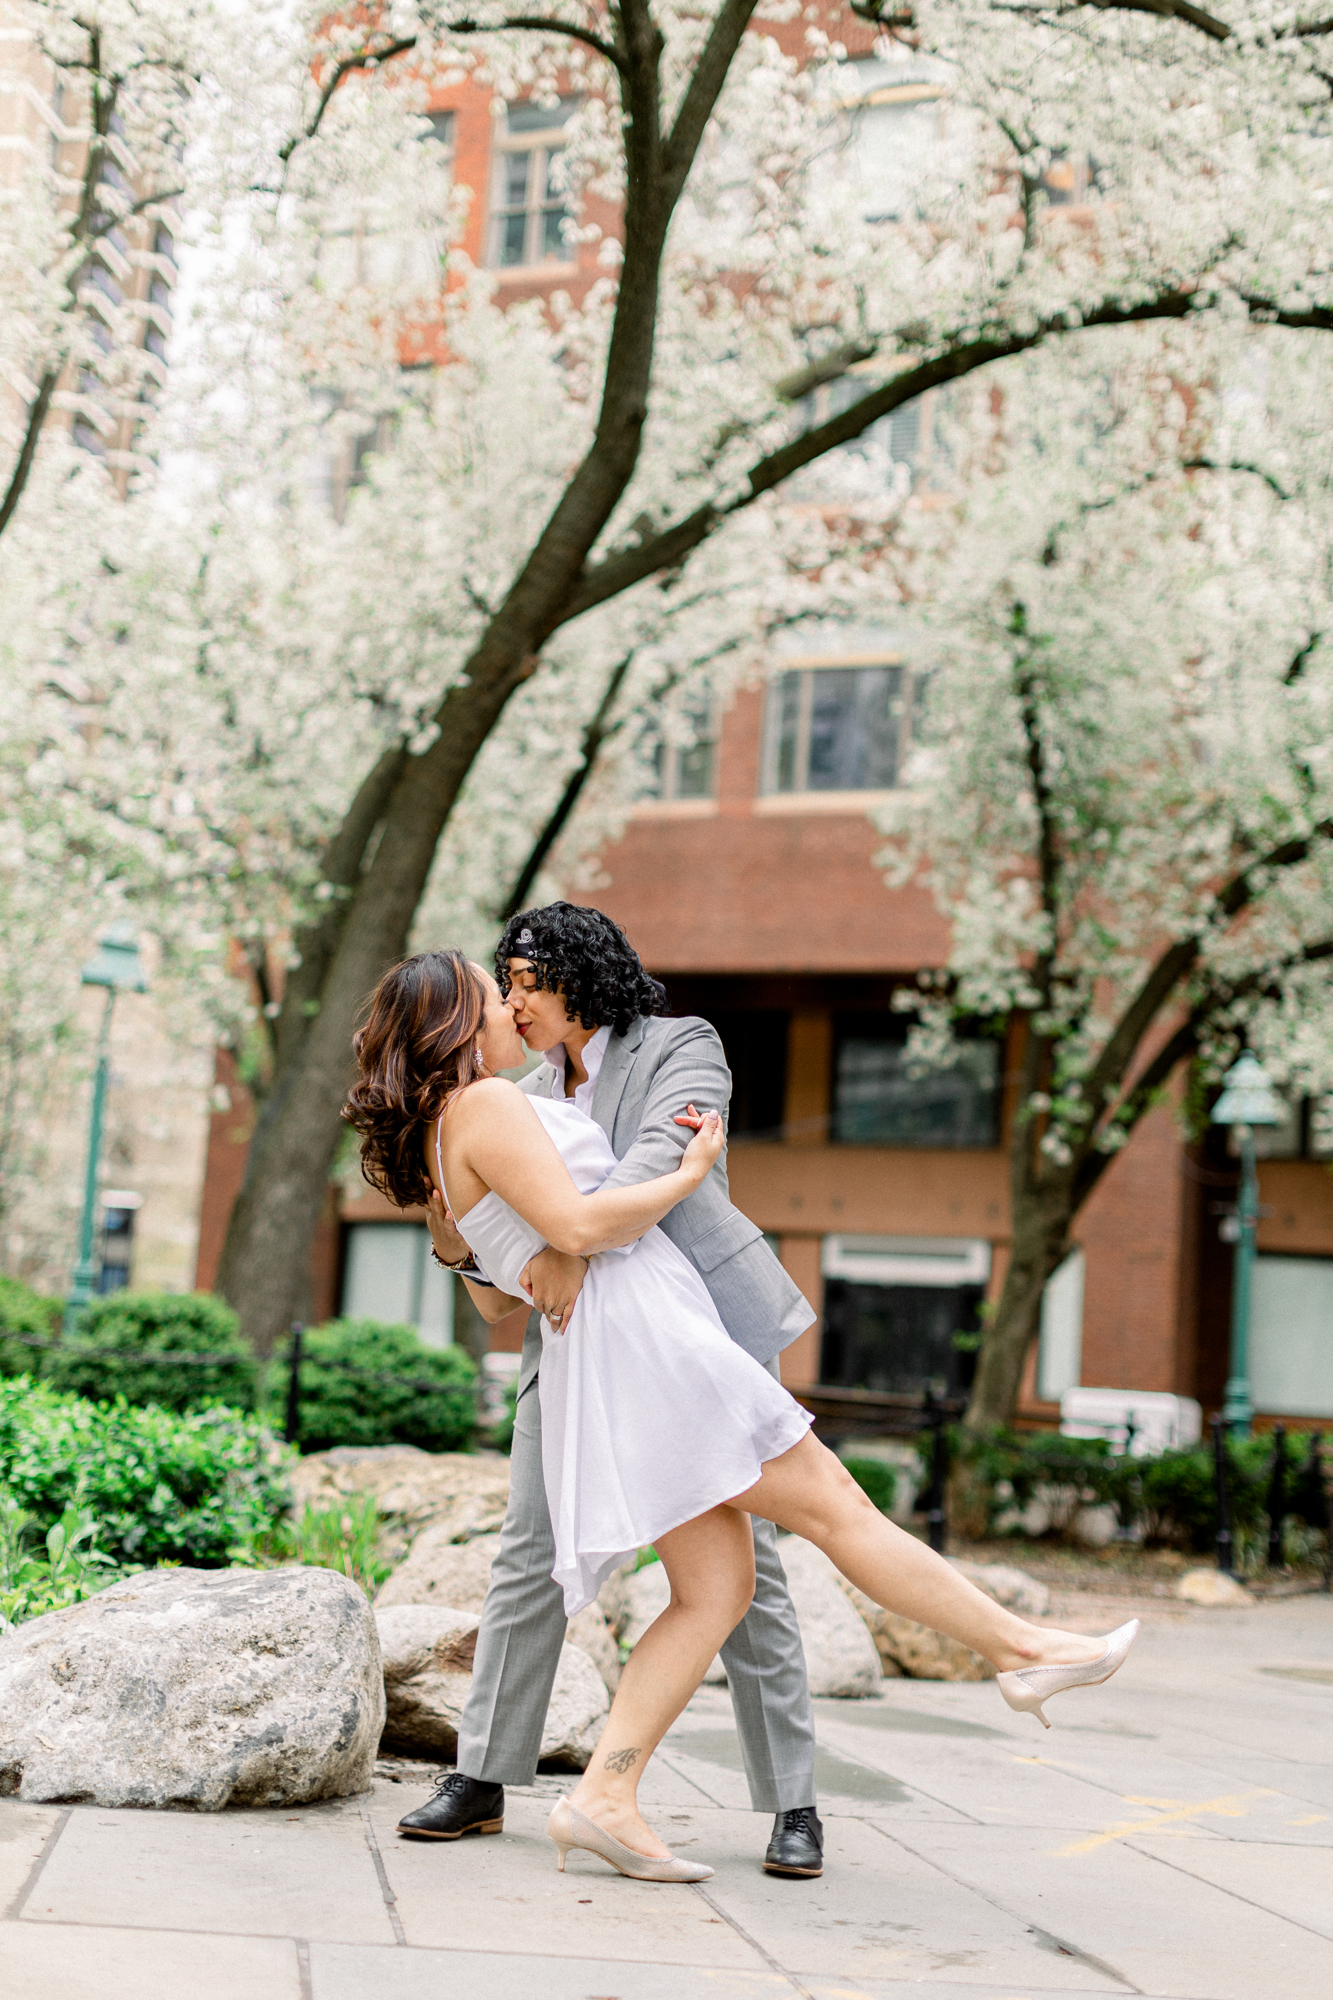 Charming New York Engagement Photography with Spring Blossoms